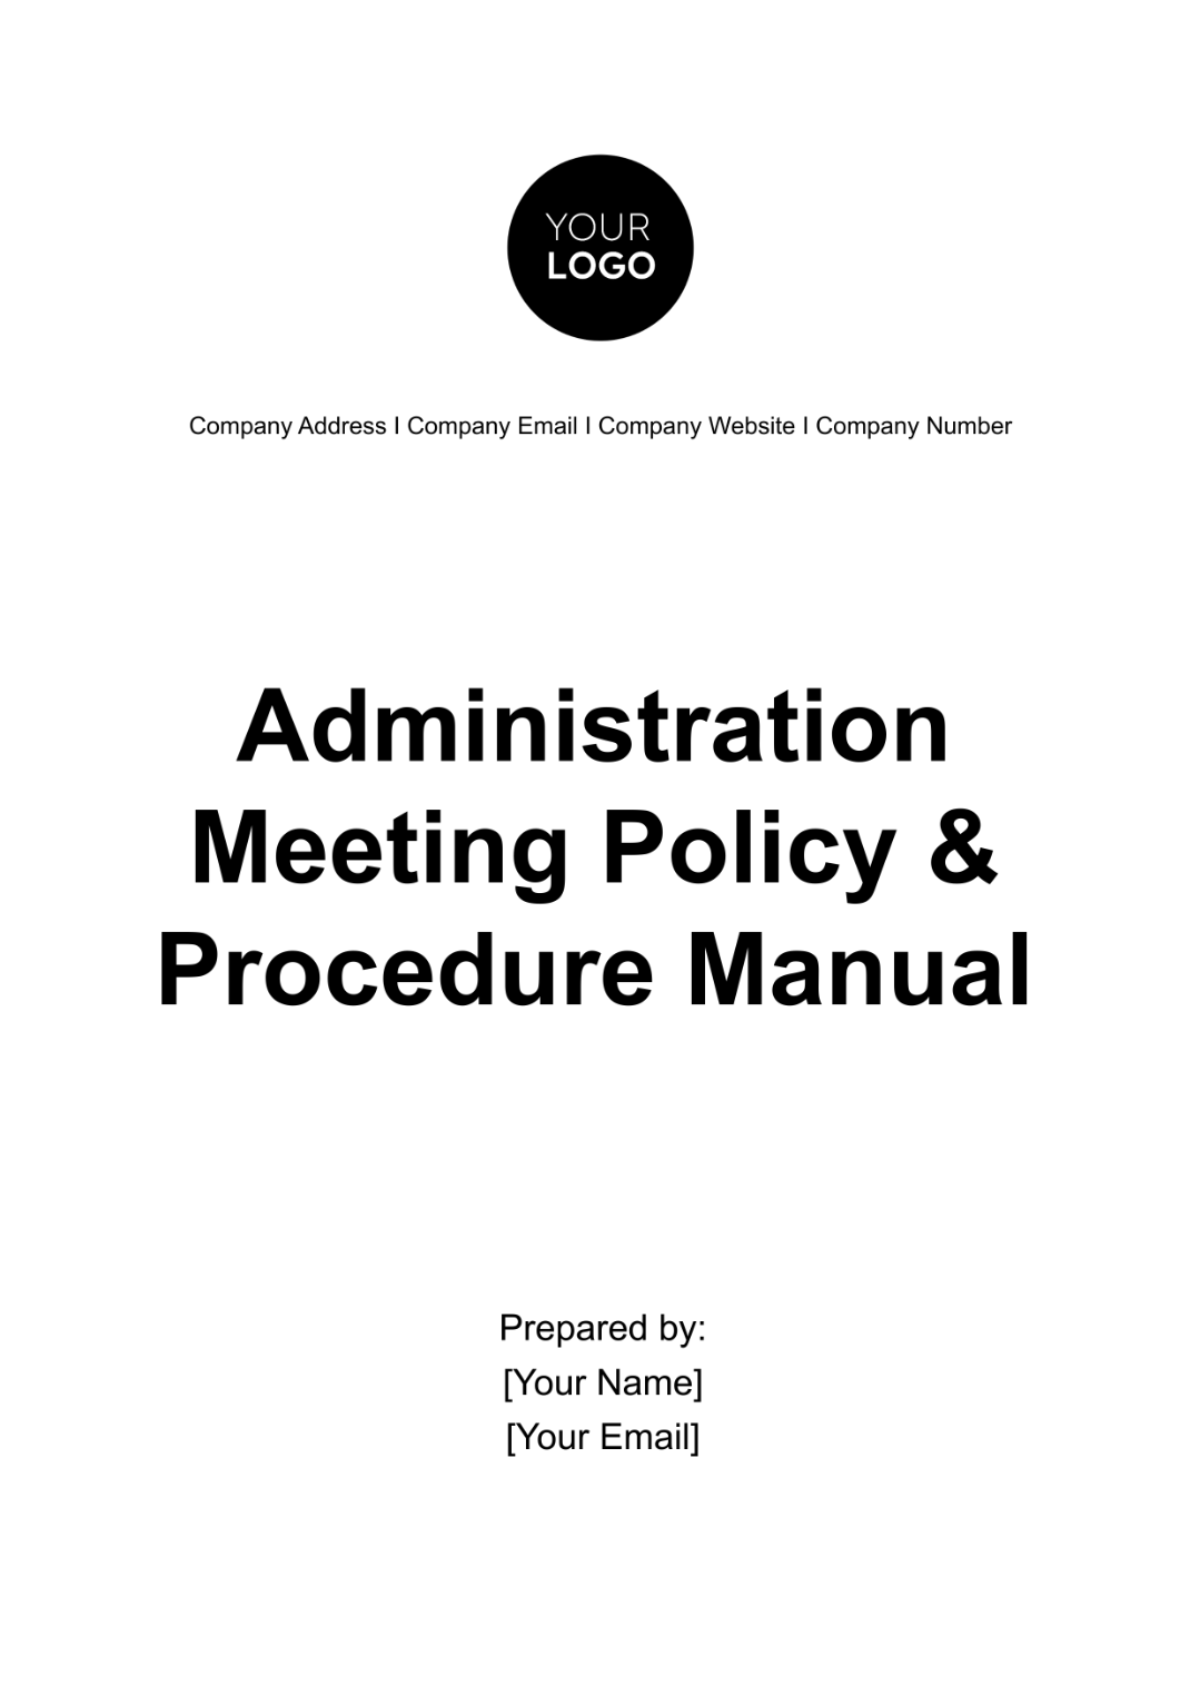 Administration Meeting Policy & Procedure Manual Template